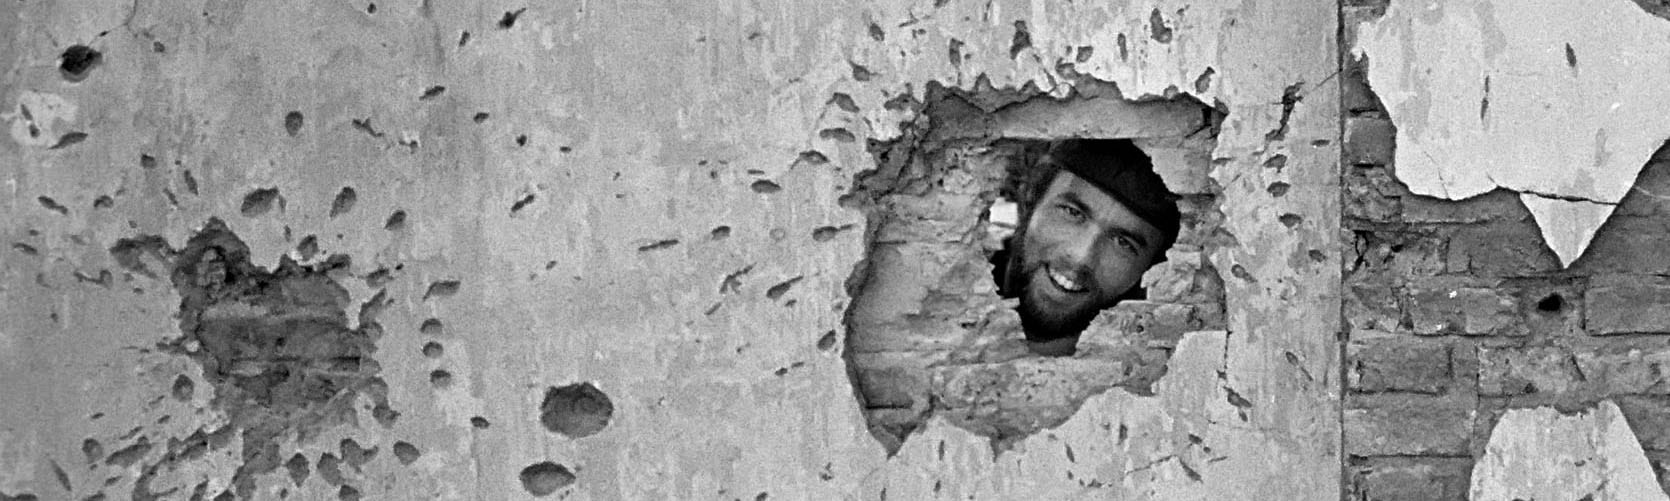 VIETNAM - - 1973: Photographer David Hume Kennerly behind a shell-pocked wall, Vietnam, 1973. Courtesy of David Hume Kennerly